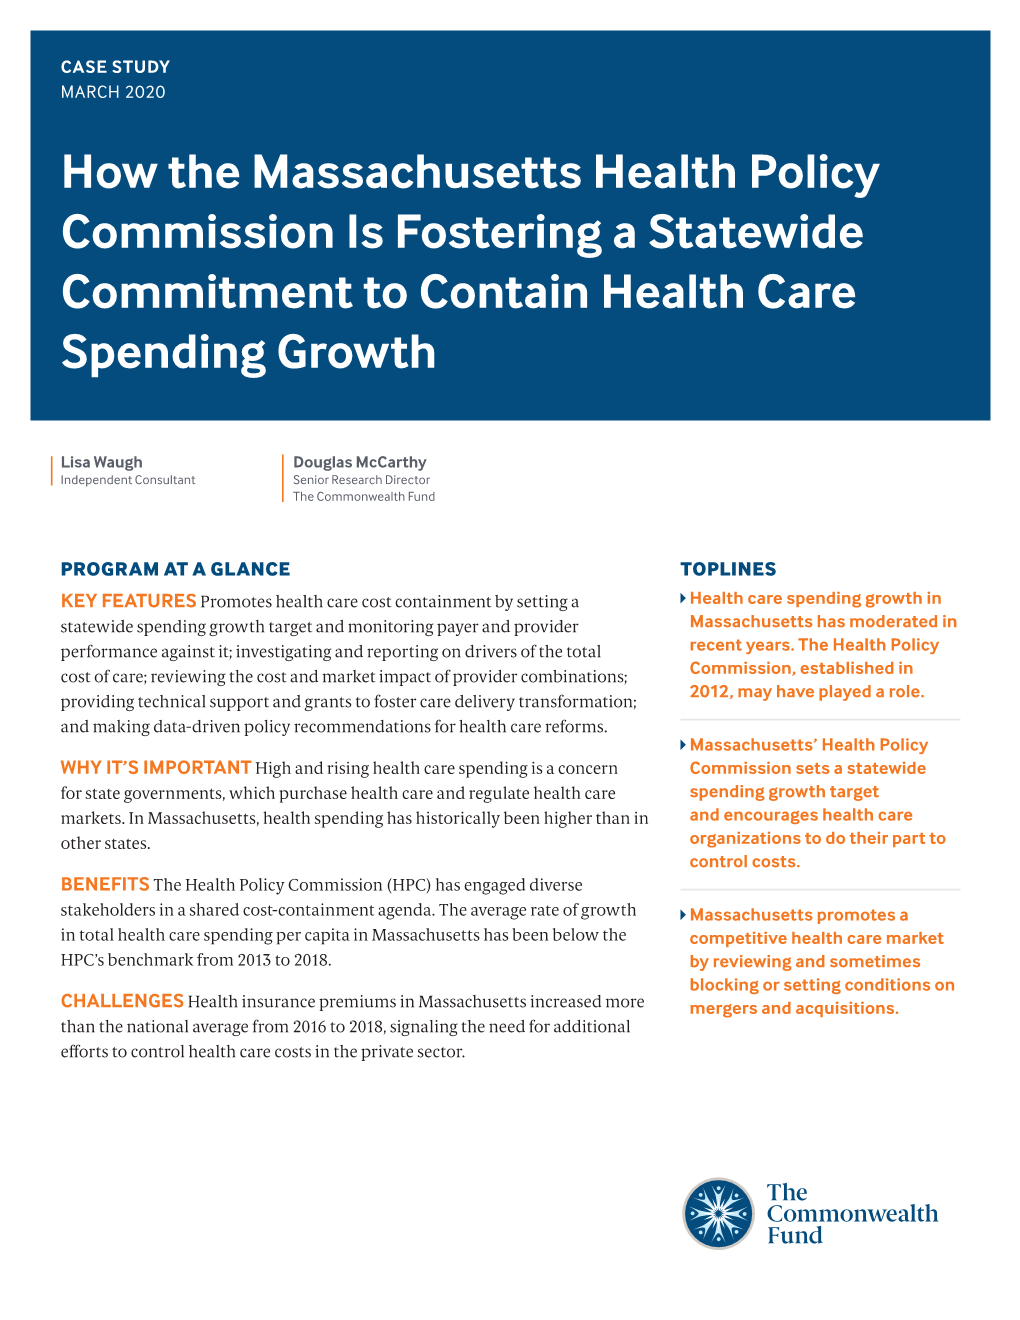 How the Massachusetts Health Policy Commission Is Fostering a Statewide Commitment to Contain Health Care Spending Growth